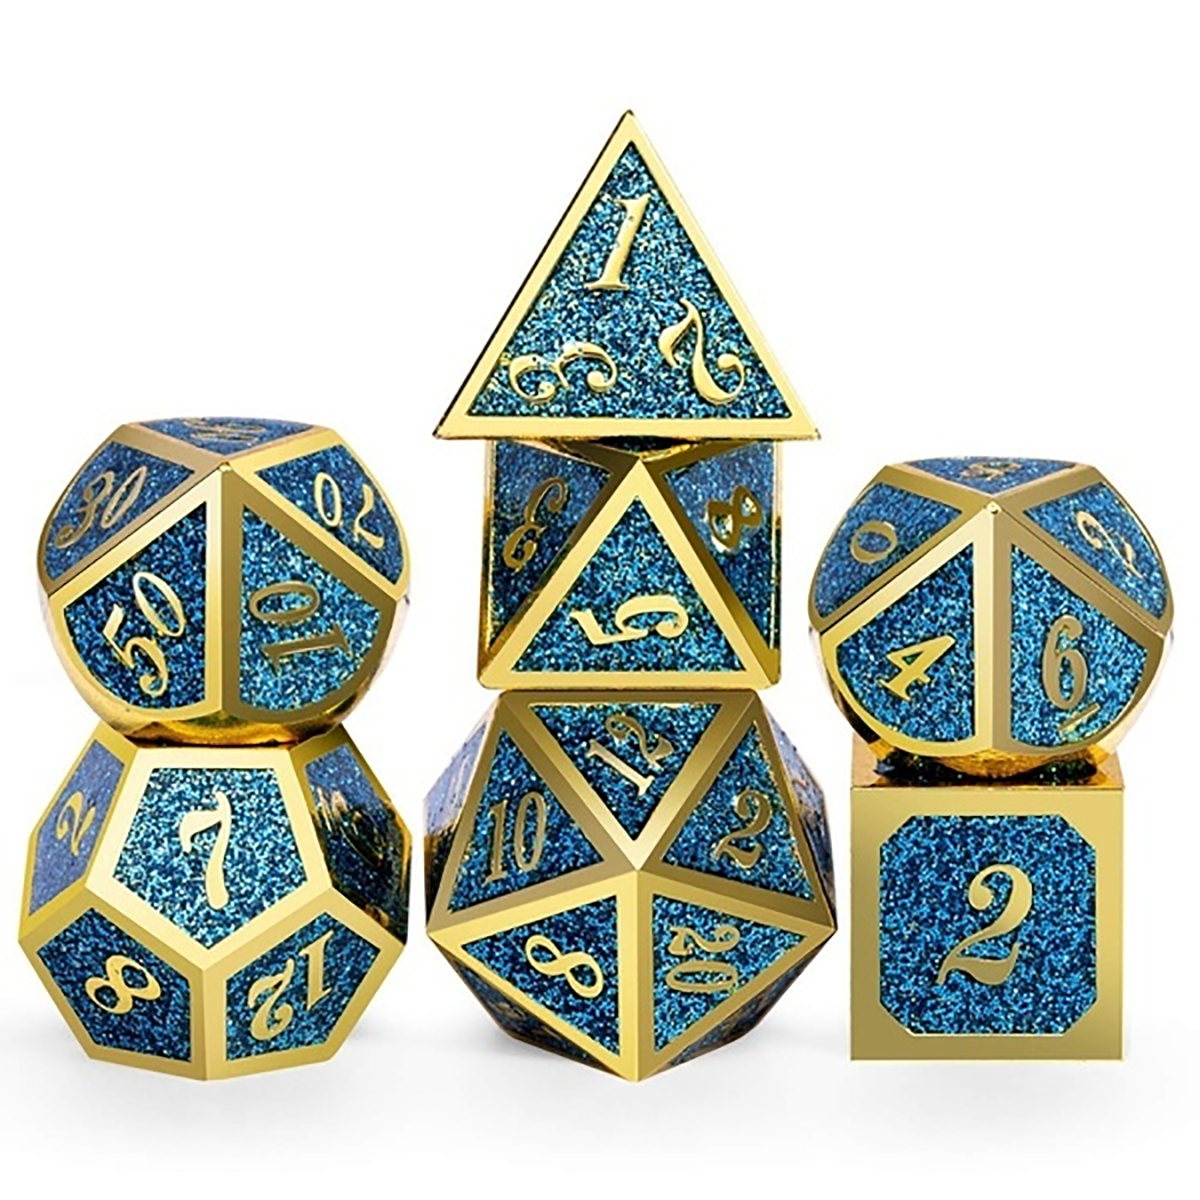 7-PcsSet-Metal-Dice-Set-Role-Playing-Dragons-Table-Board-Game-Toys-With-Cloth-Bag-Bar-Party-Game-Dic-1672532-5